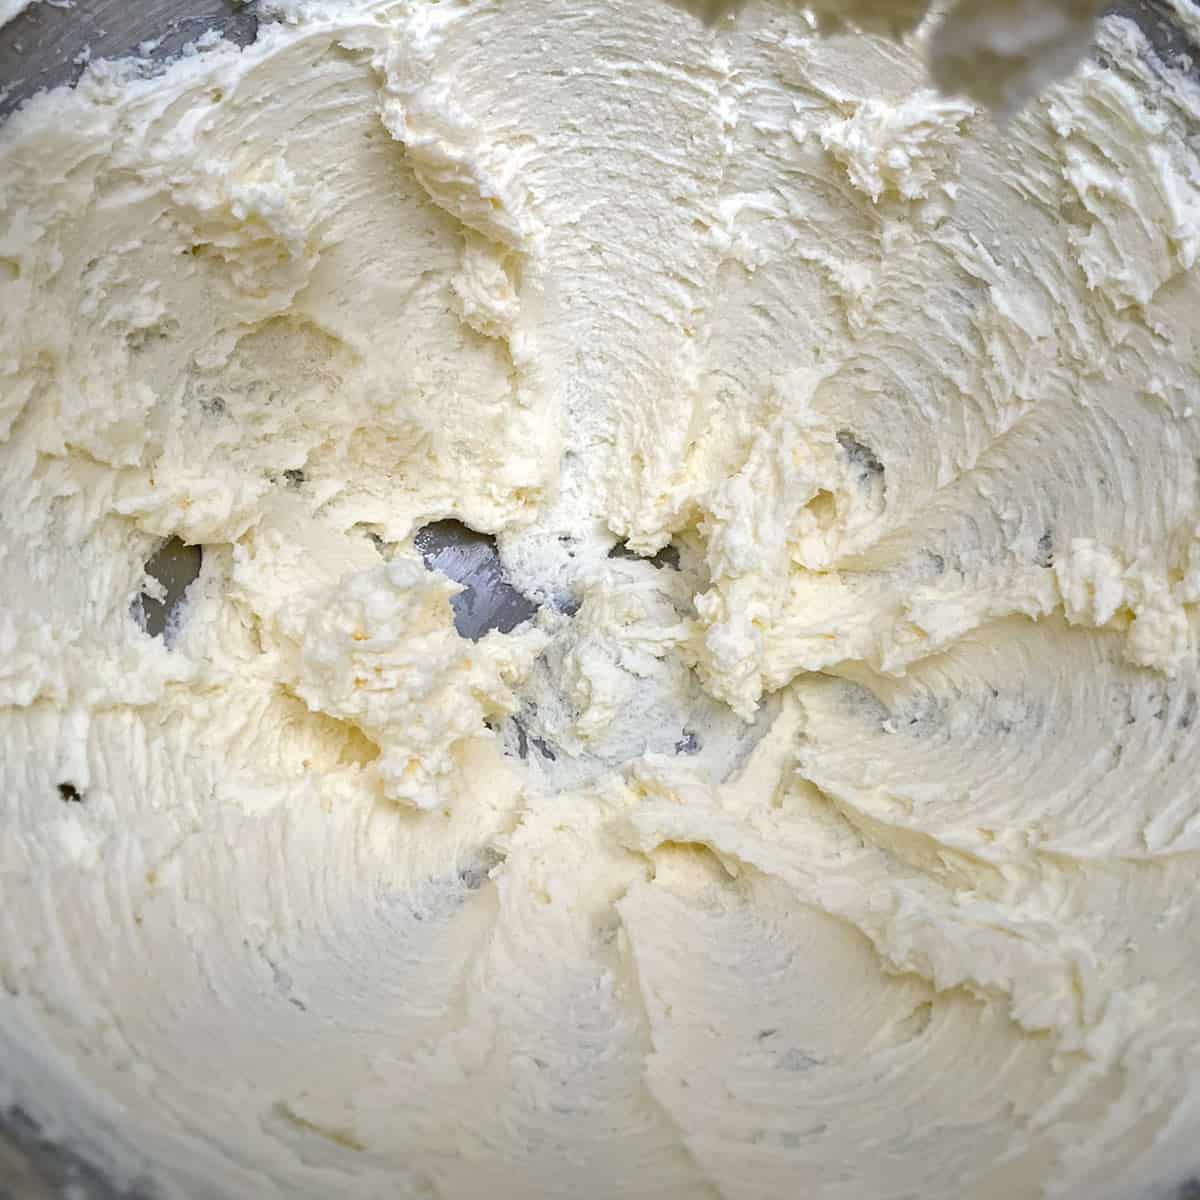 Cream cheese and butter after it has been mixed for 2 minutes.